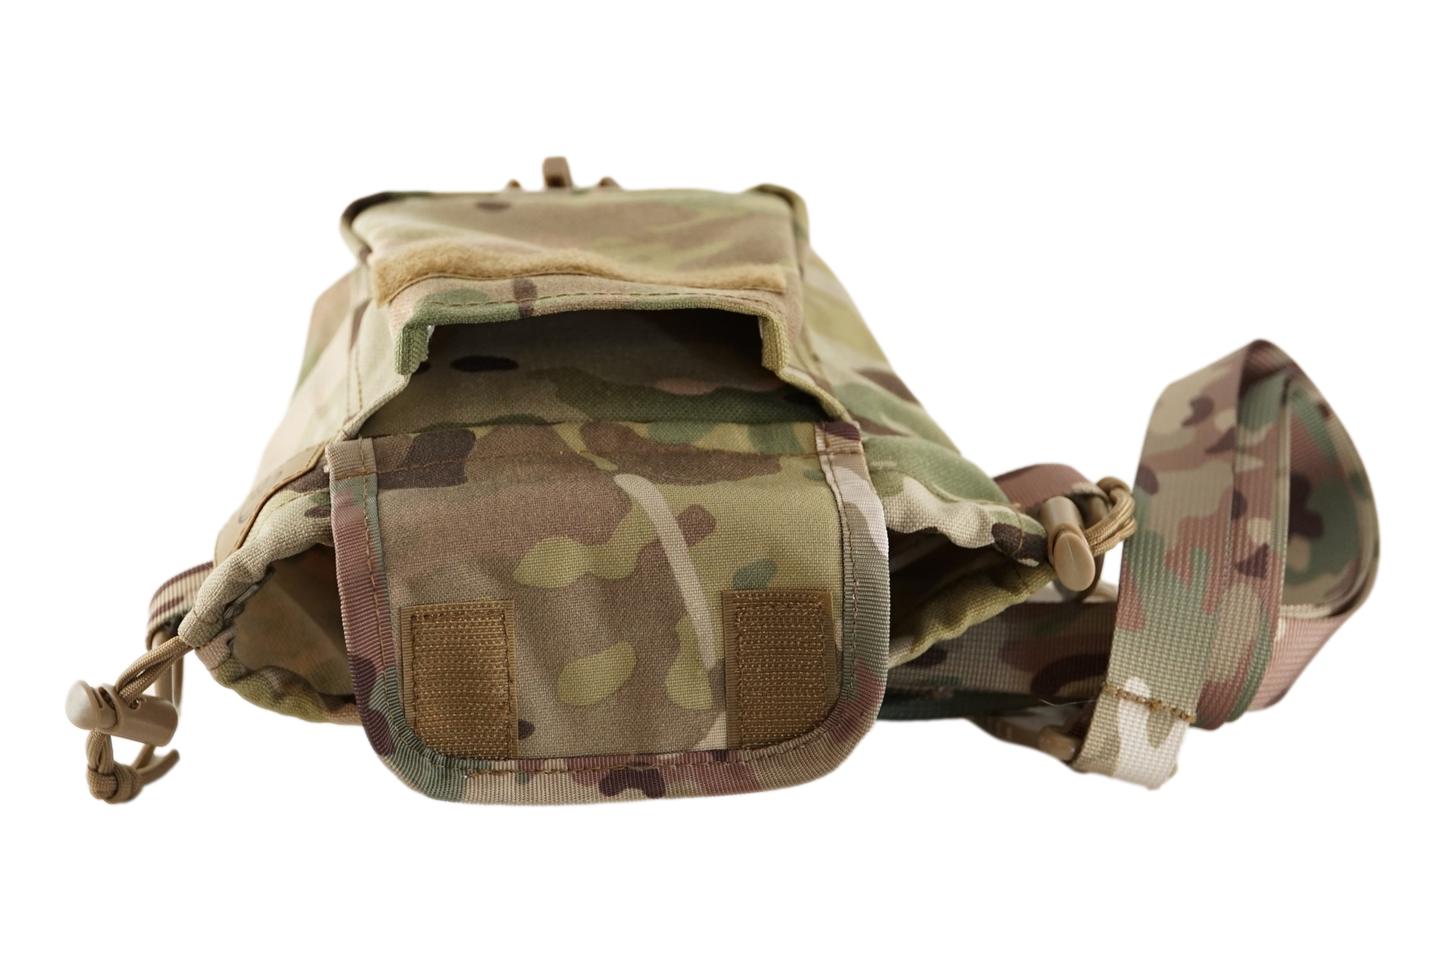 Valtcan Canteen Pouch Carrying Case Bag Multicam Classic Camo Cover Colorway for Titanium Canteen Set